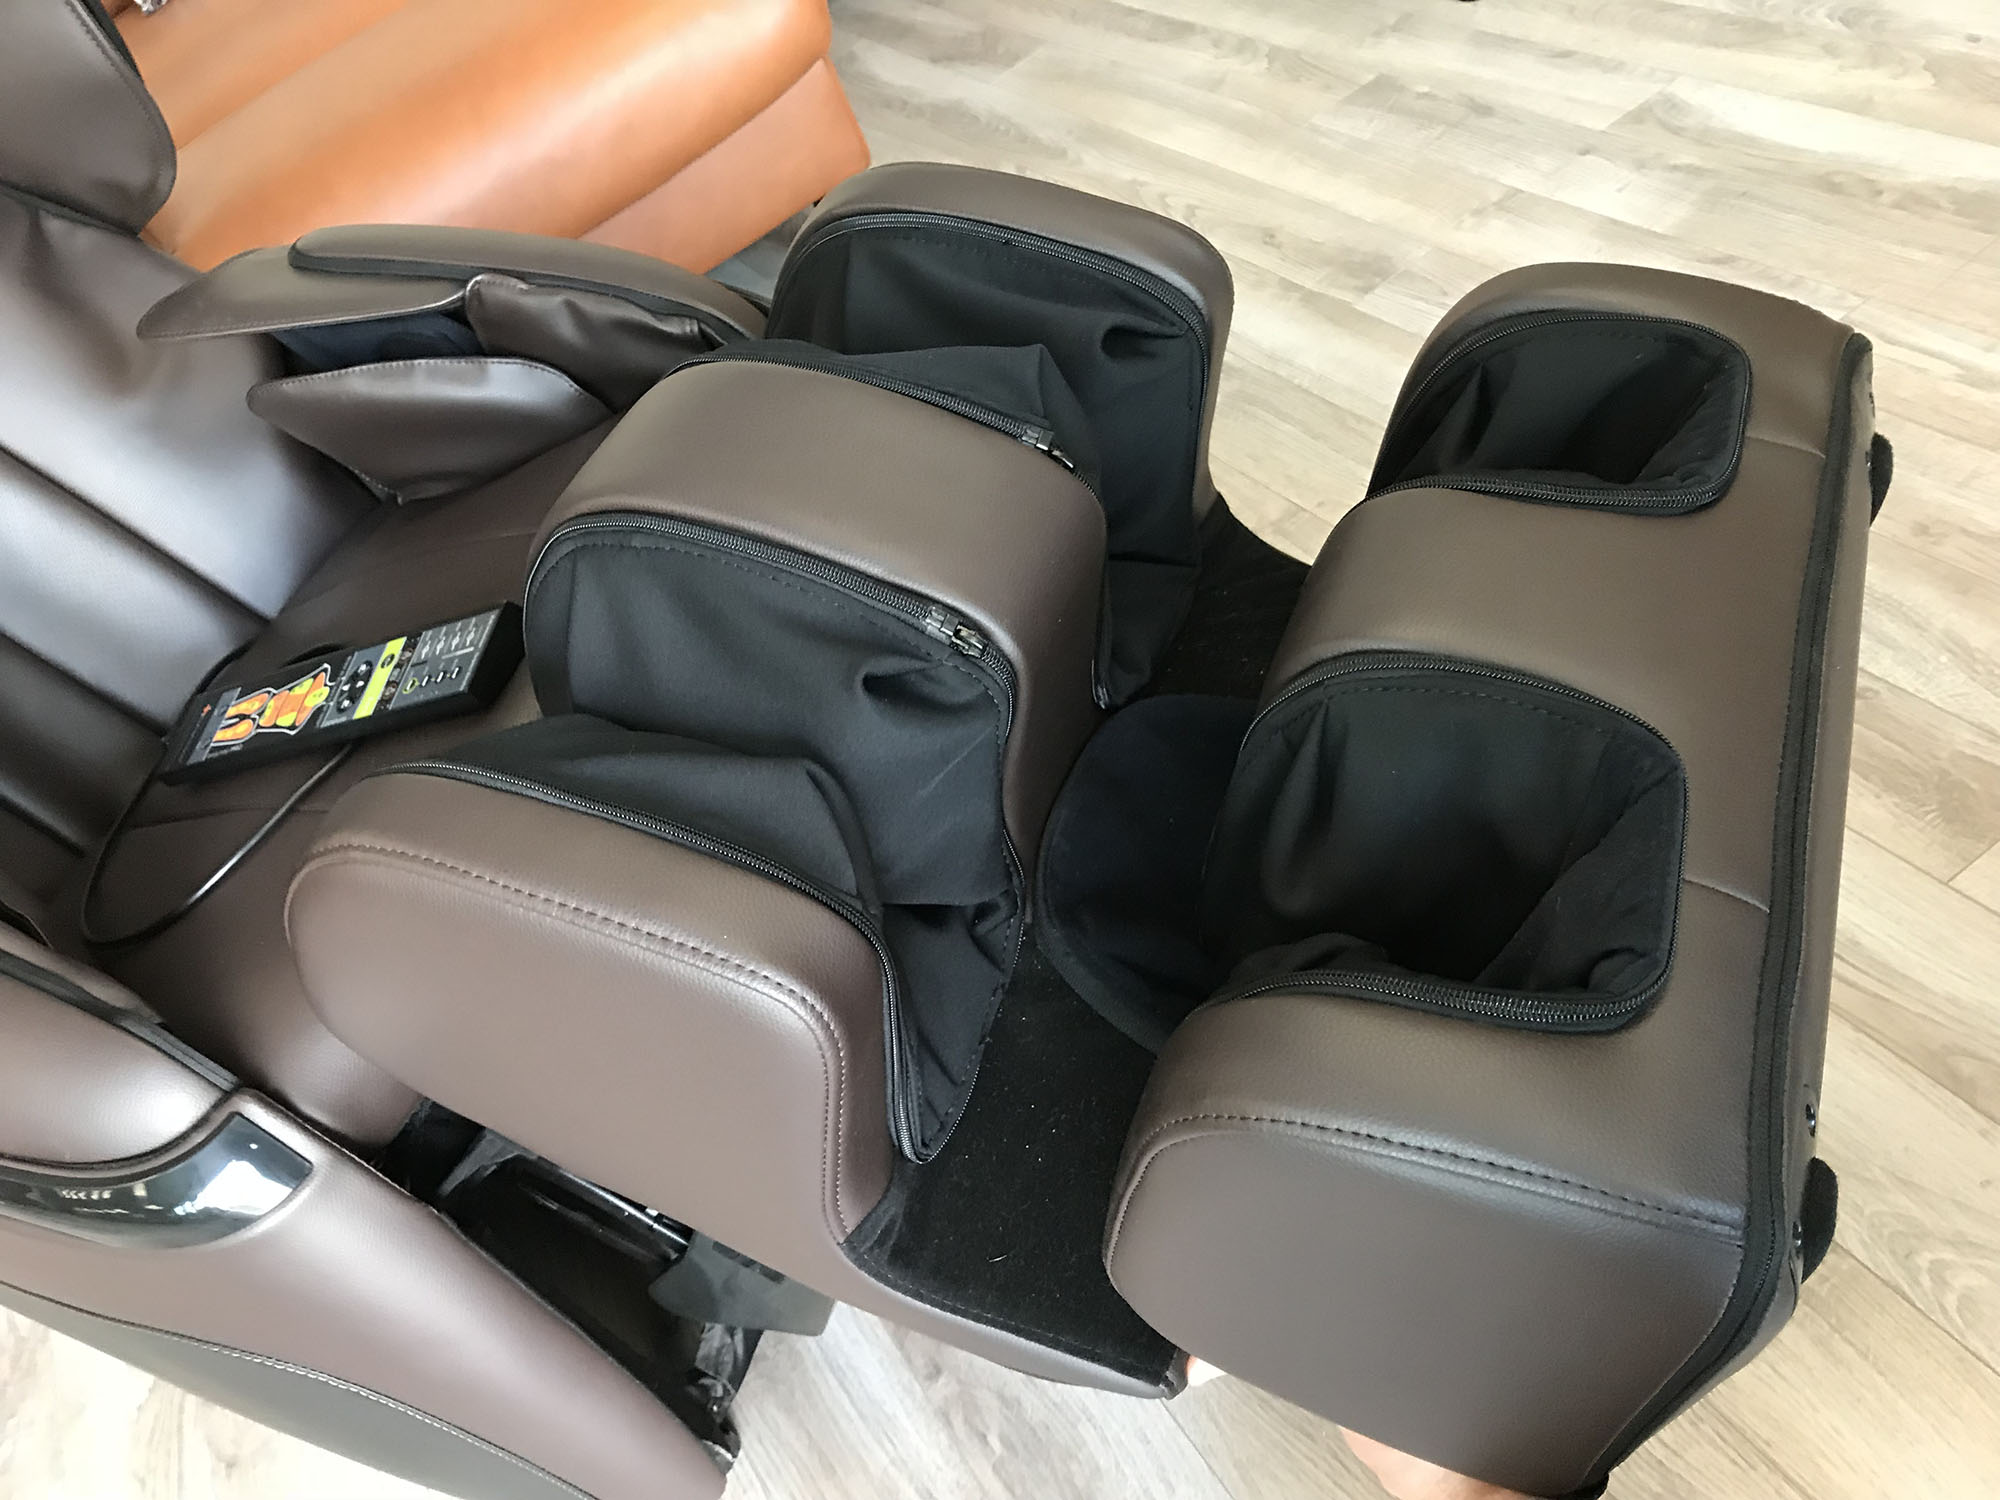 https://vitalityweb.com/backstore/HumanTouch/pics/Human-Touch-Opus-Massage-Chair-Recliner-Footrest-Brown-2.jpg